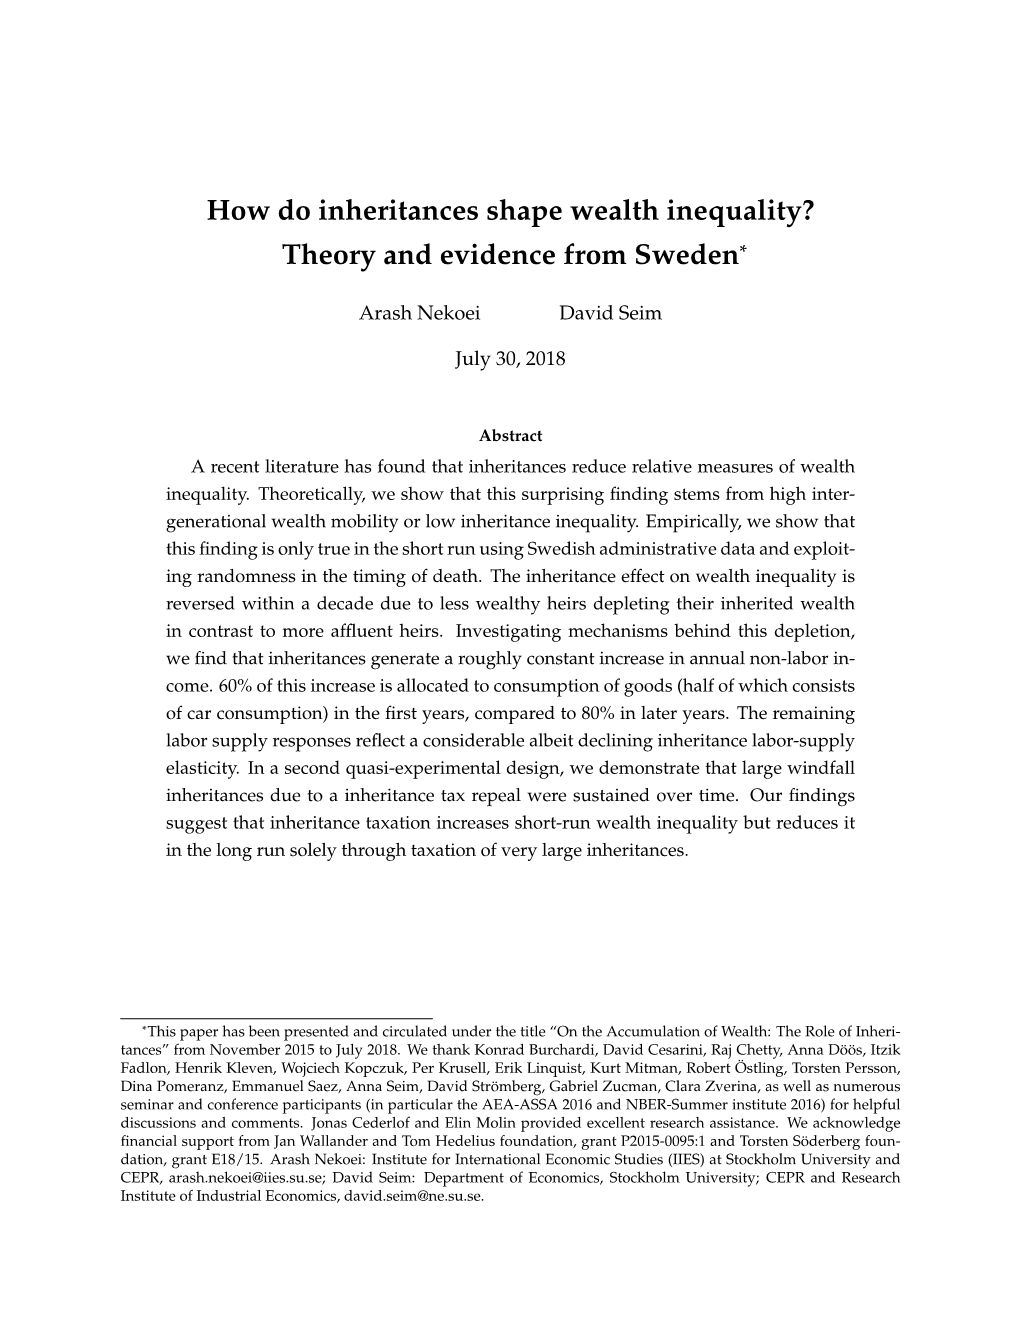 How Do Inheritances Shape Wealth Inequality? Theory and Evidence from Sweden*